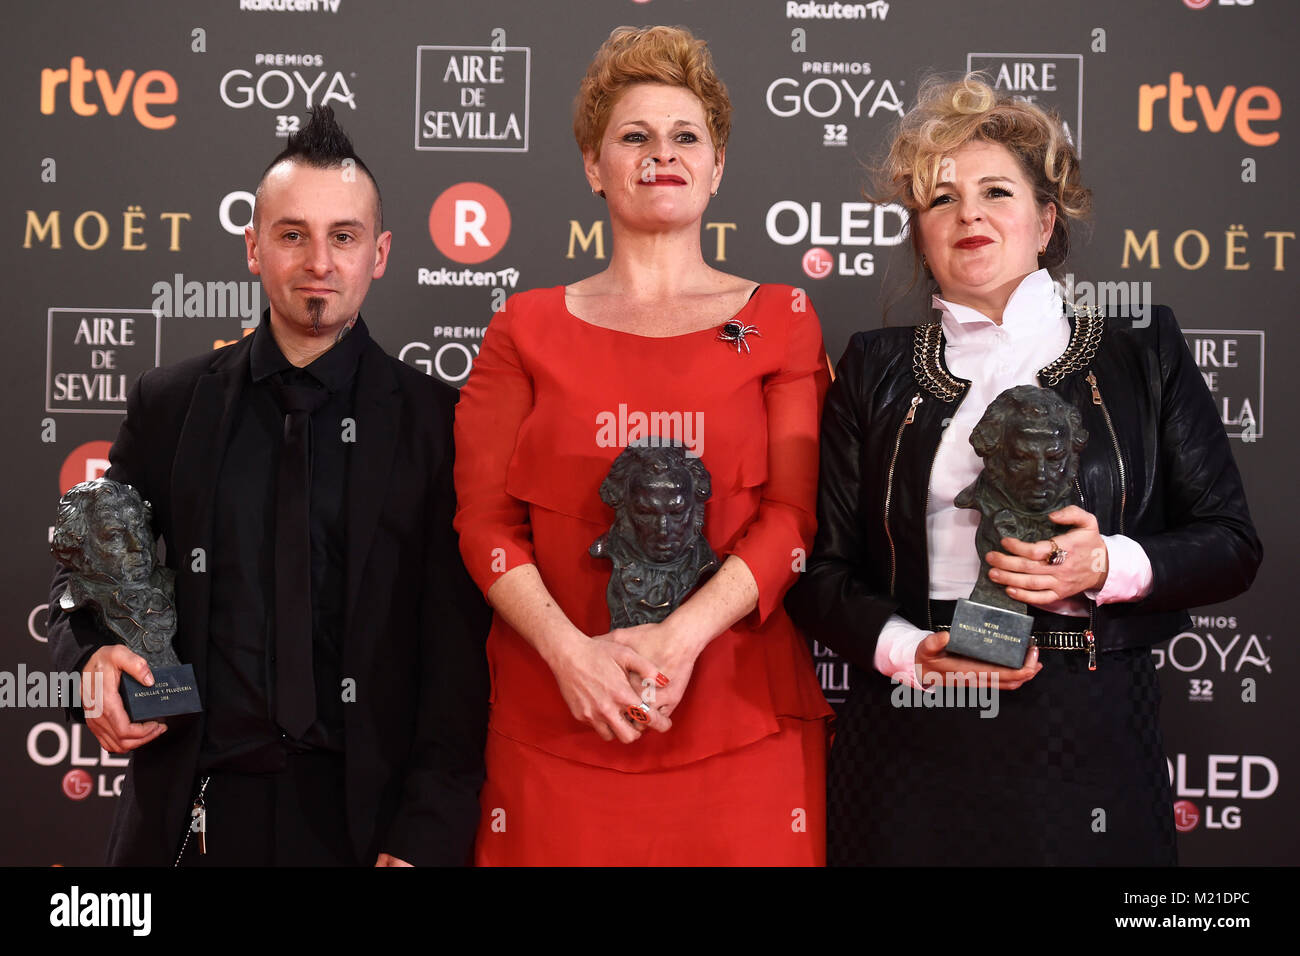 Ainhoa Eskisabel, Olga Cruz and Gorka Aguirre Frias in the press room during the 32th annual Goya Film Awards in Madrid, on Saturday 3rd February, 2018. pictured : Goya maquillaje y peluqueria ' Handia ' Credit: Gtres Información más Comuniación on line, S.L./Alamy Live News Stock Photo